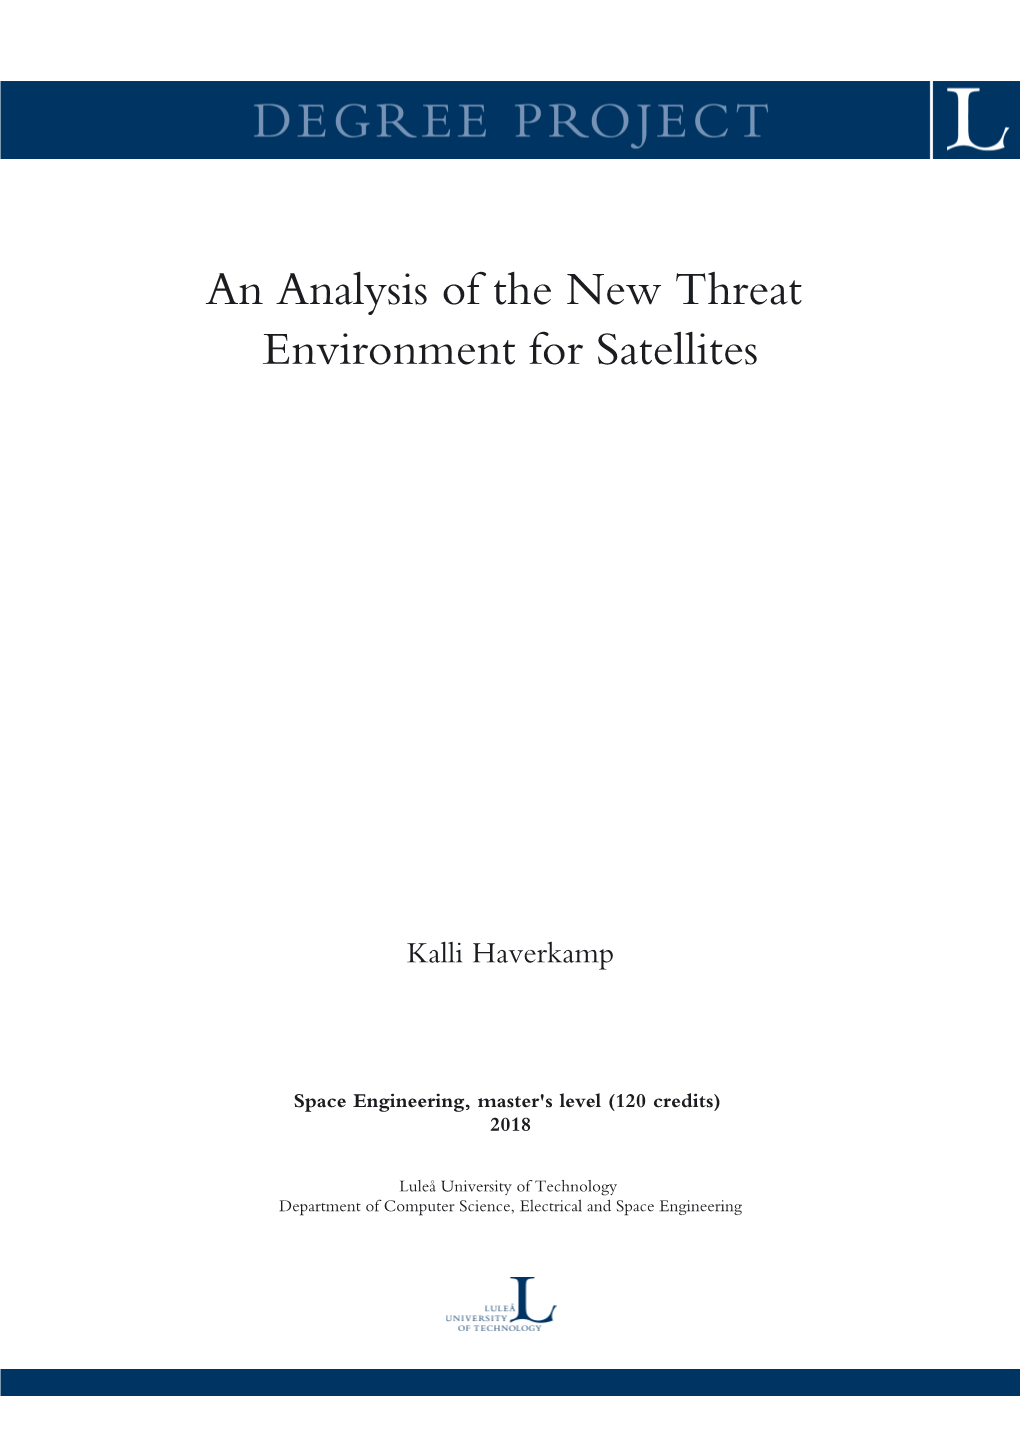 An Analysis of the New Threat Environment for Satellites